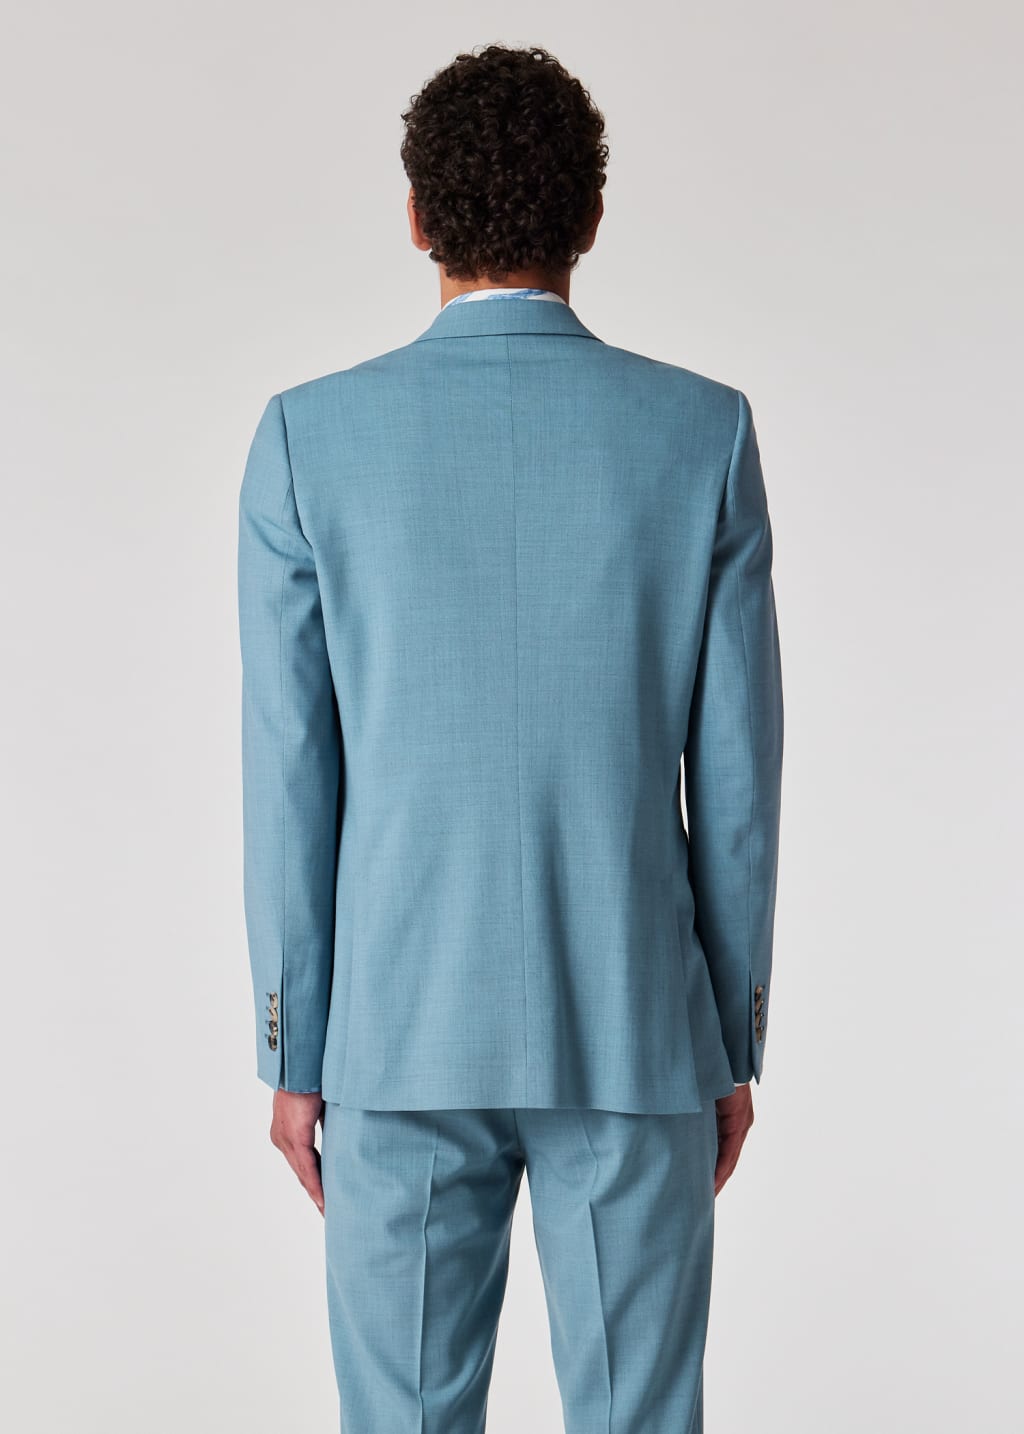 Model view - The Brierley - Blue Marl Overdyed Stretch-Wool Suit Paul Smith